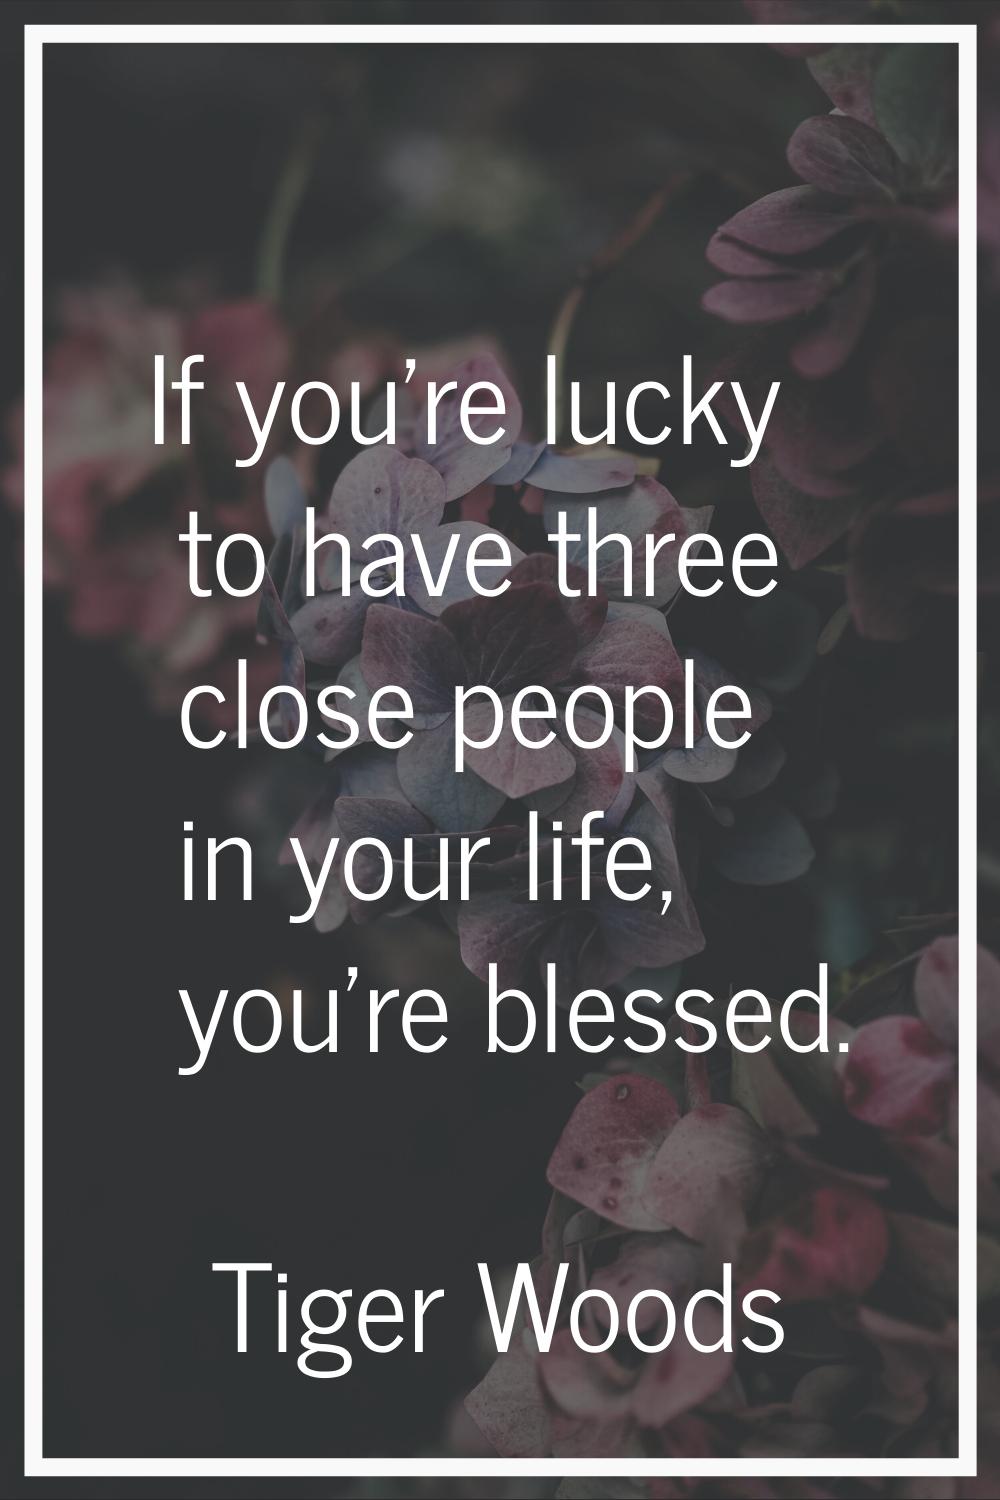 If you're lucky to have three close people in your life, you're blessed.